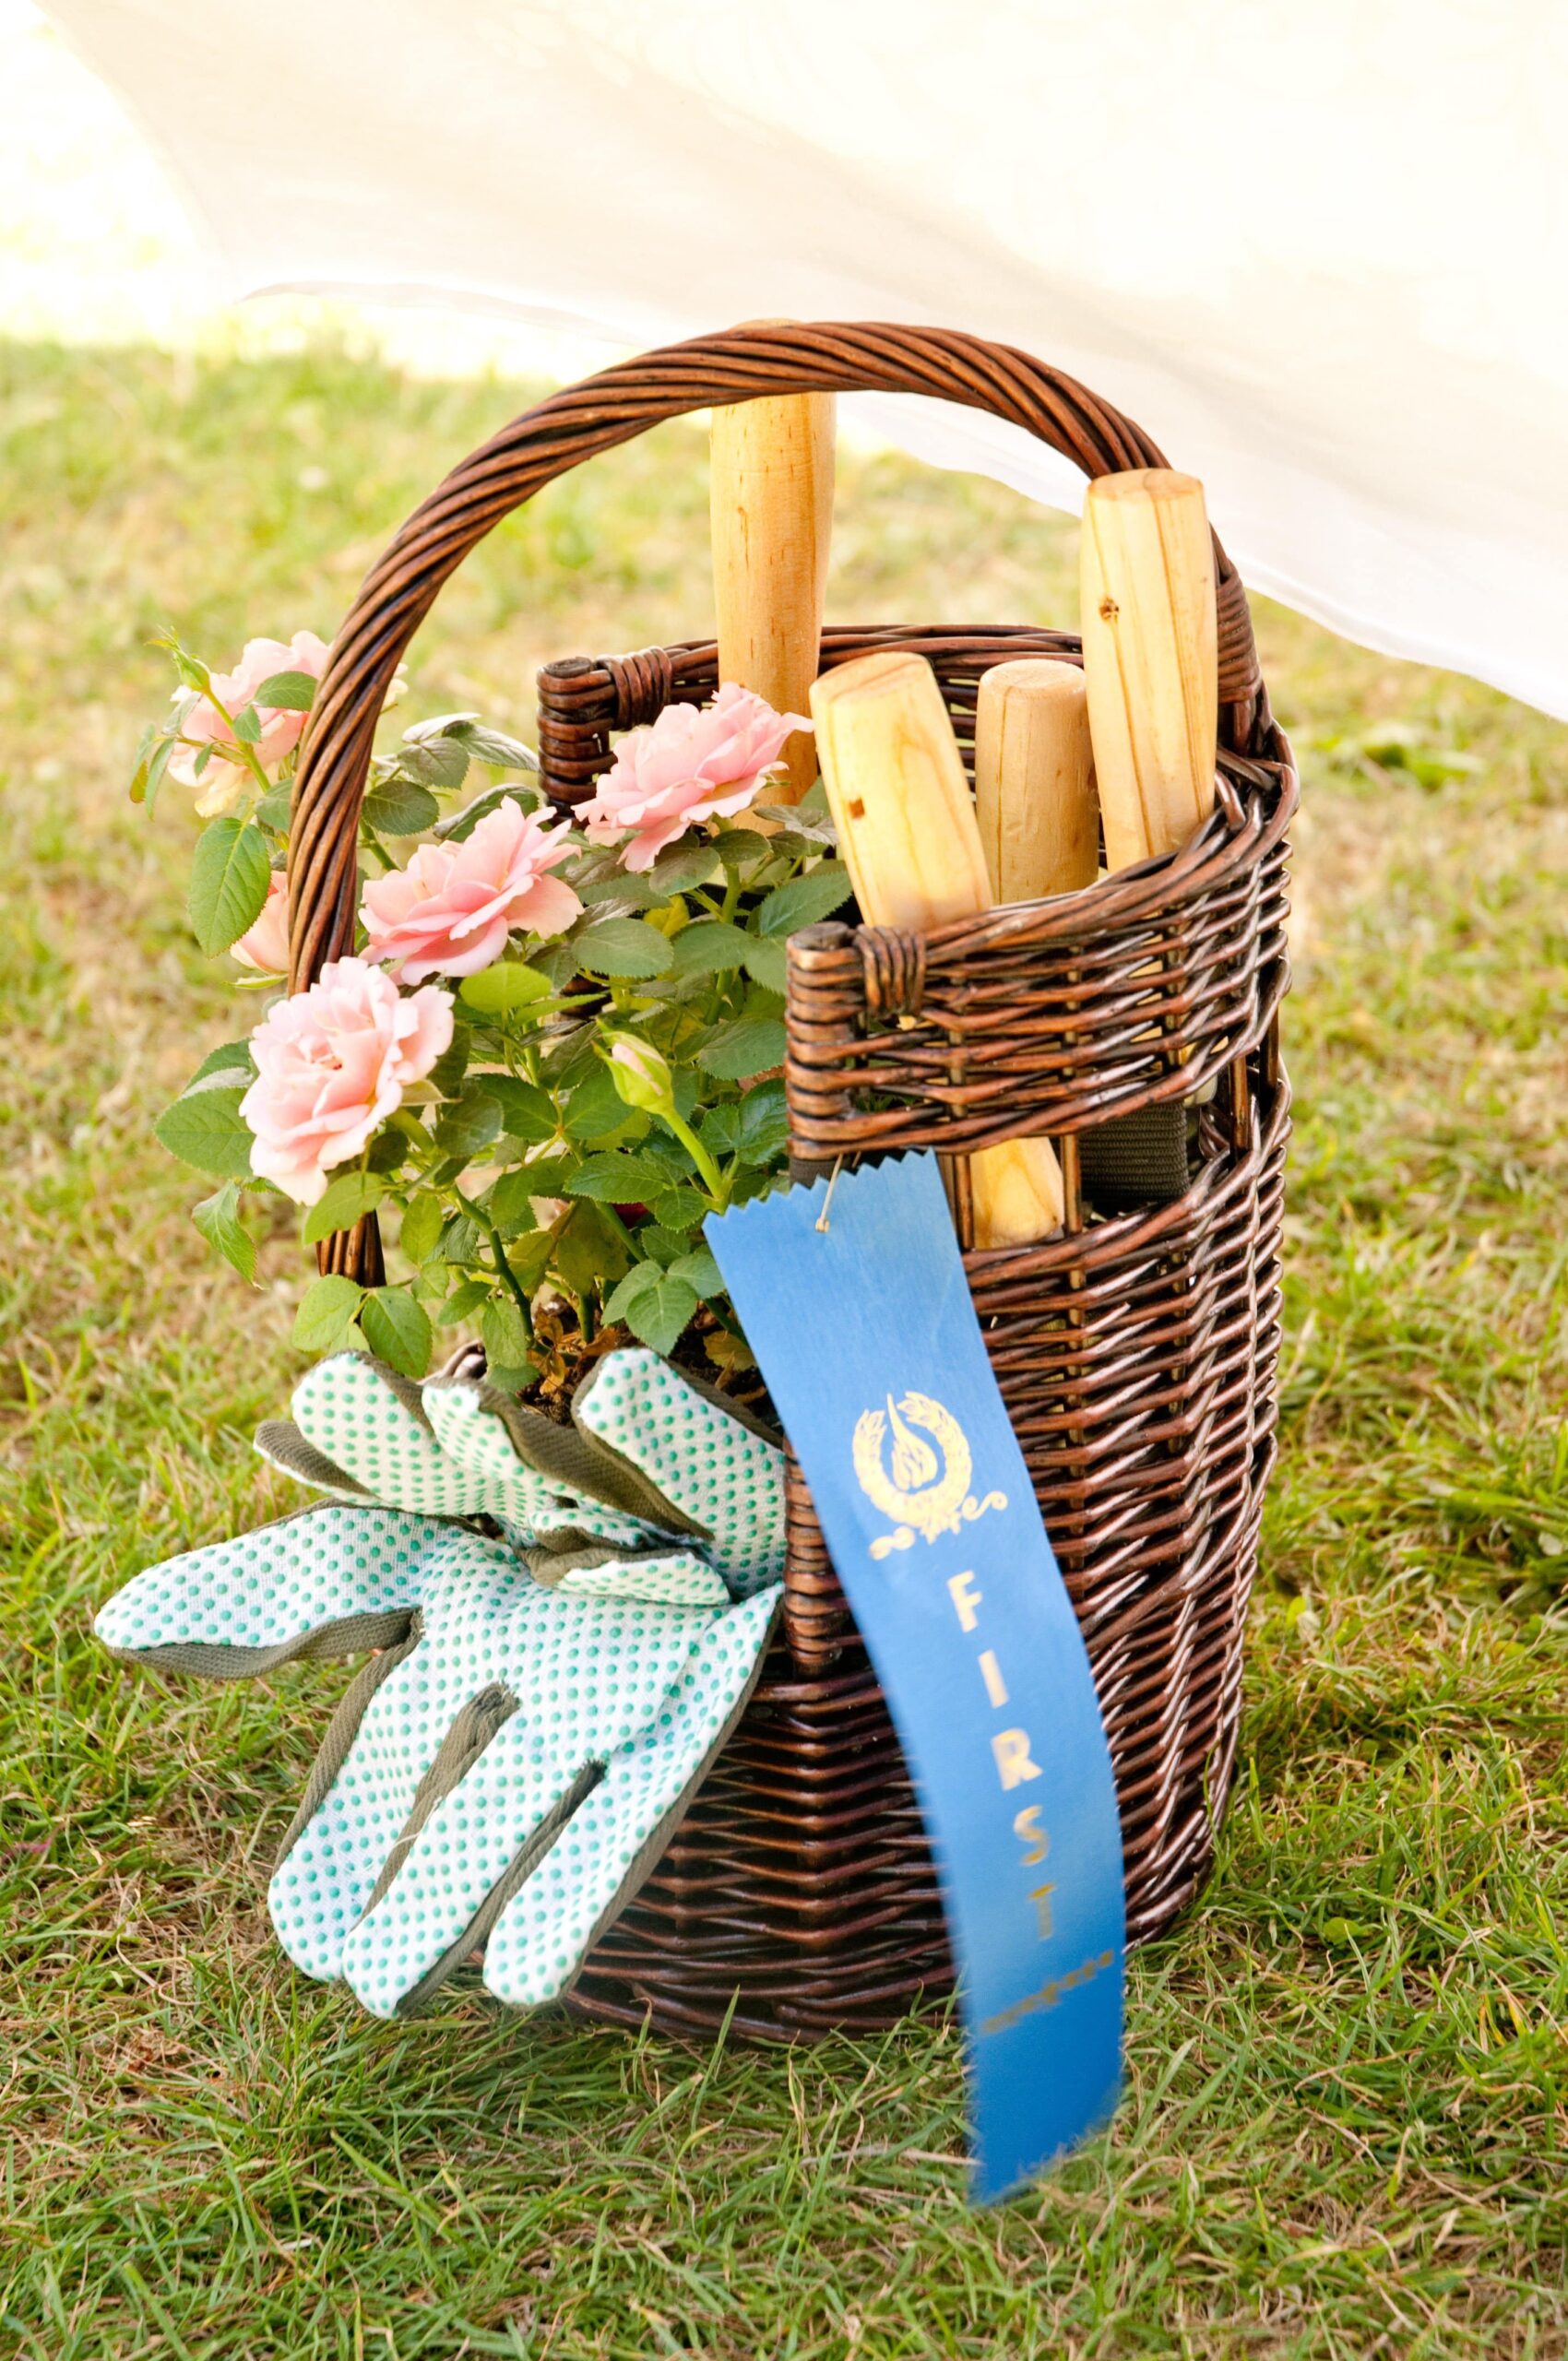 Gardening baskets at company summer party